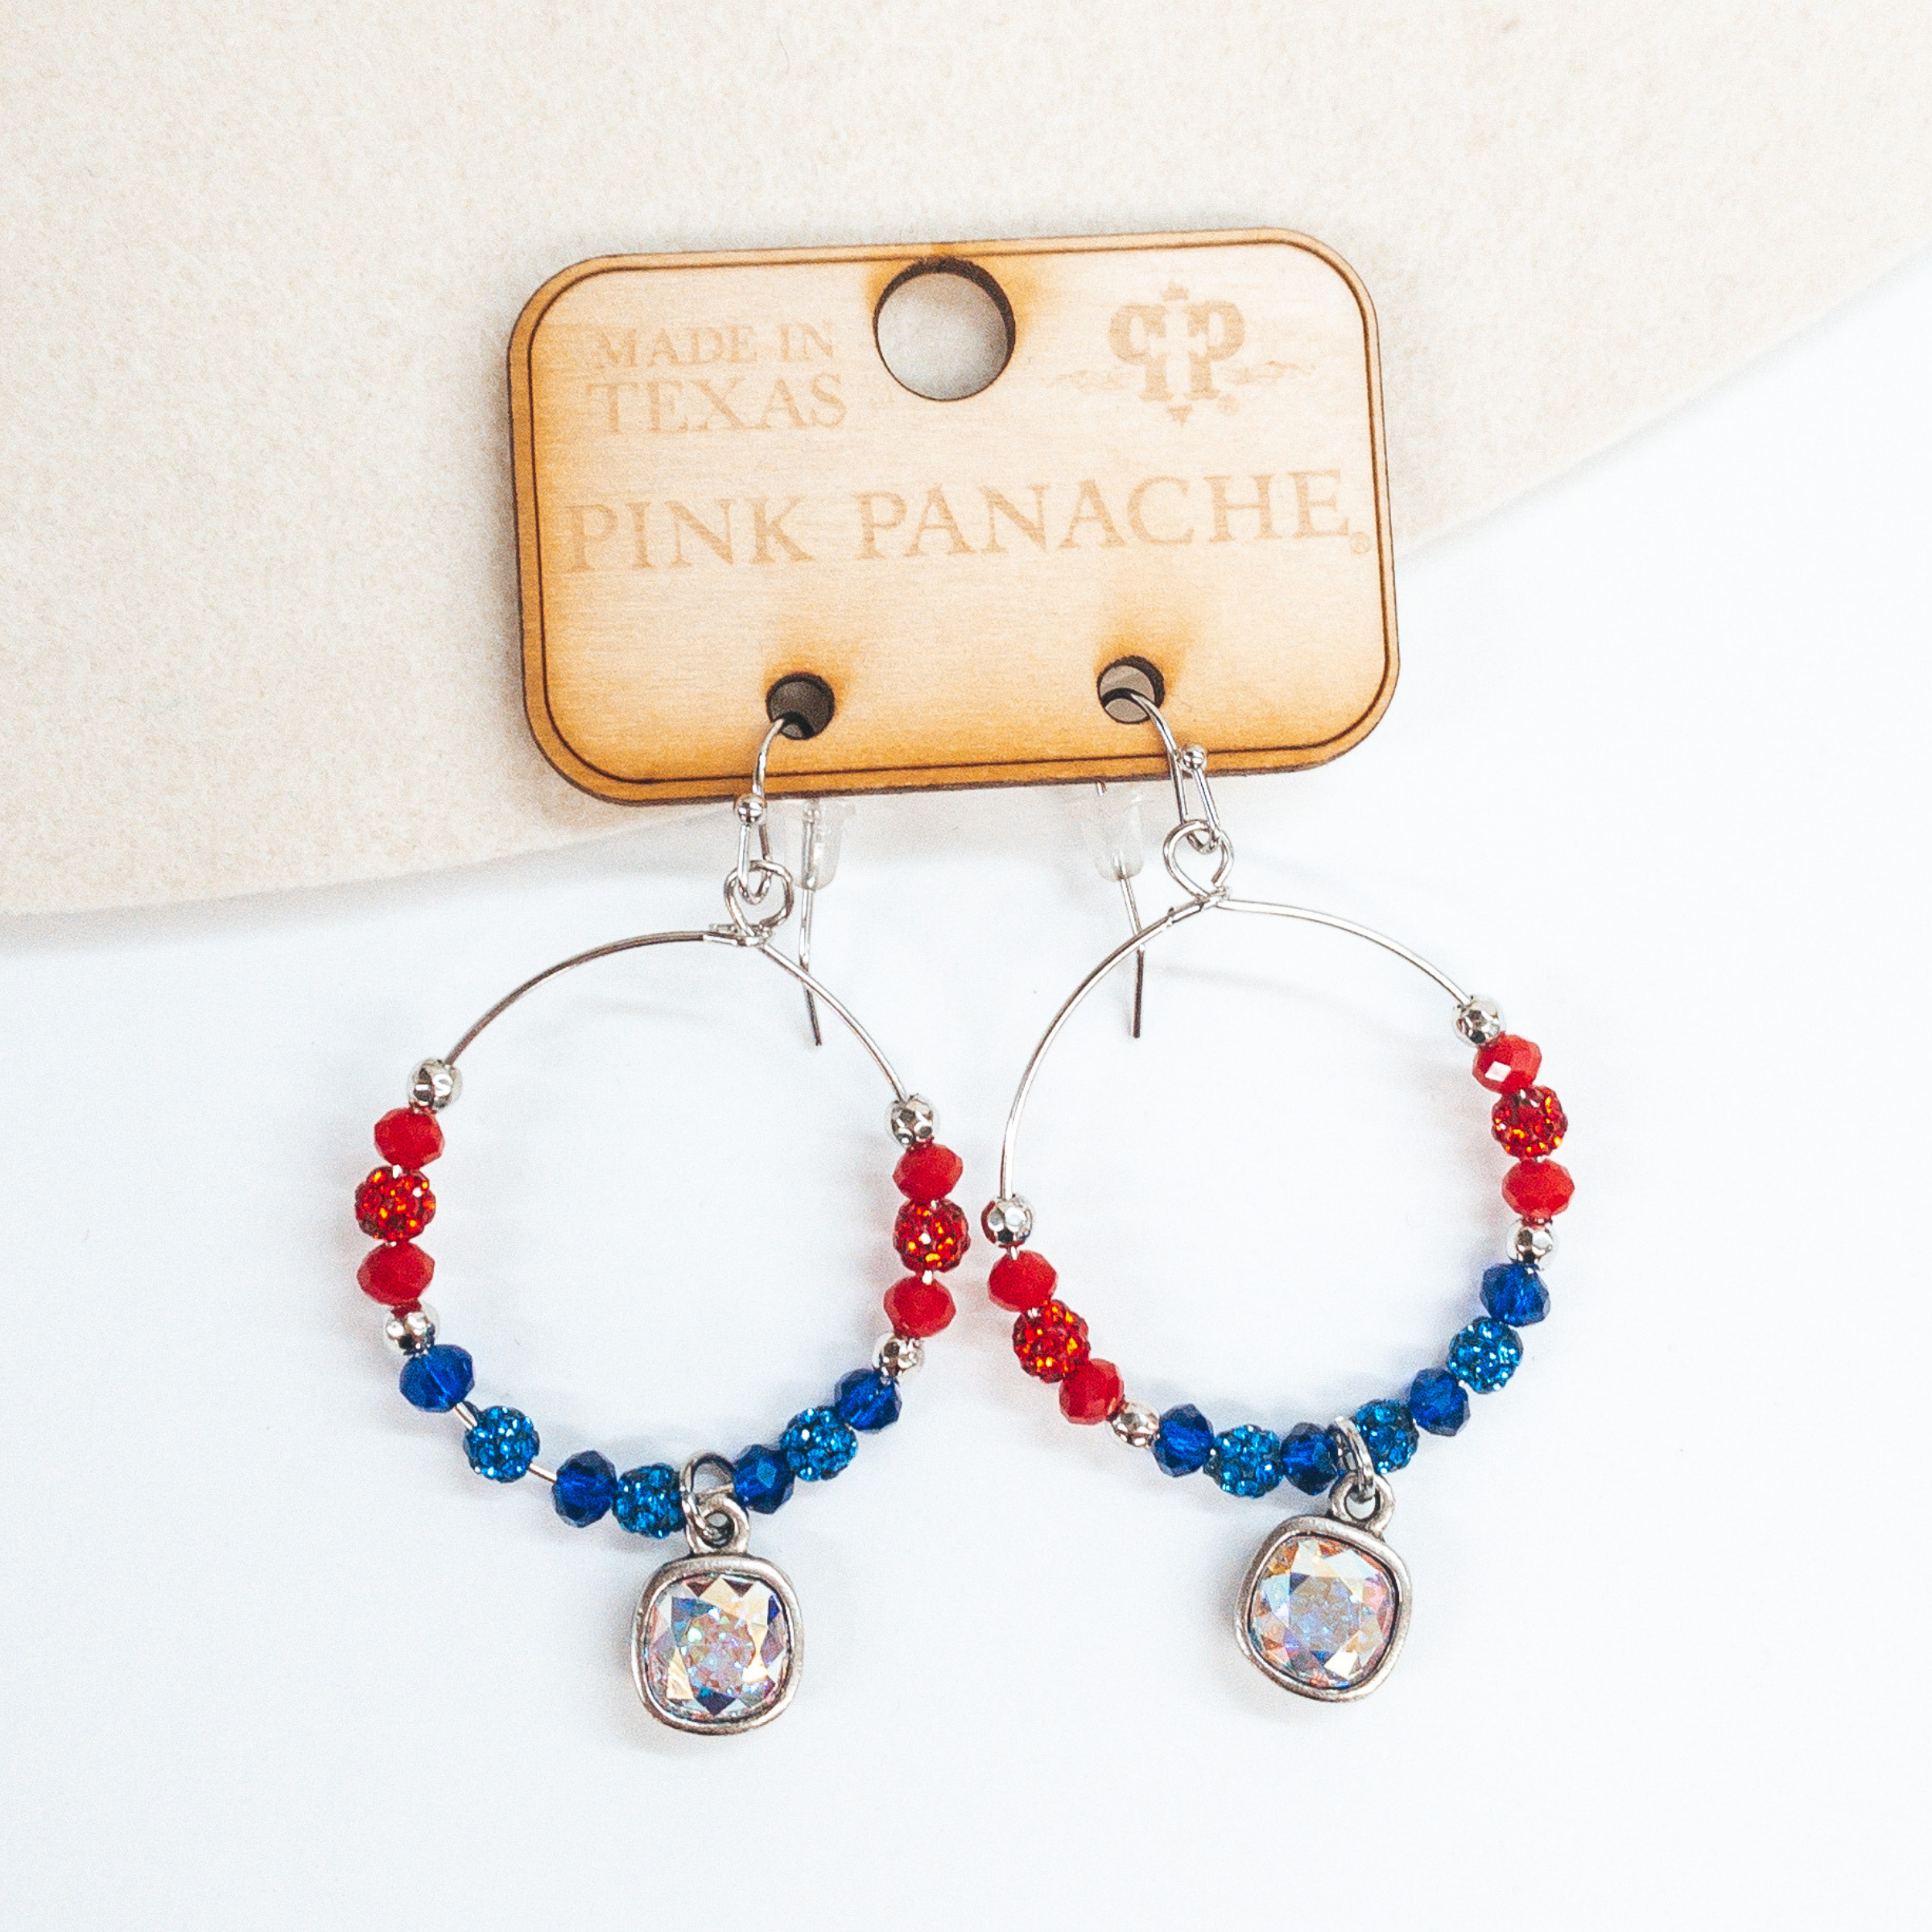 Pink Panache | Silver Hoop Earrings with Red, White, and Blue Crystalized Beads with Hanging AB Crystal - Giddy Up Glamour Boutique